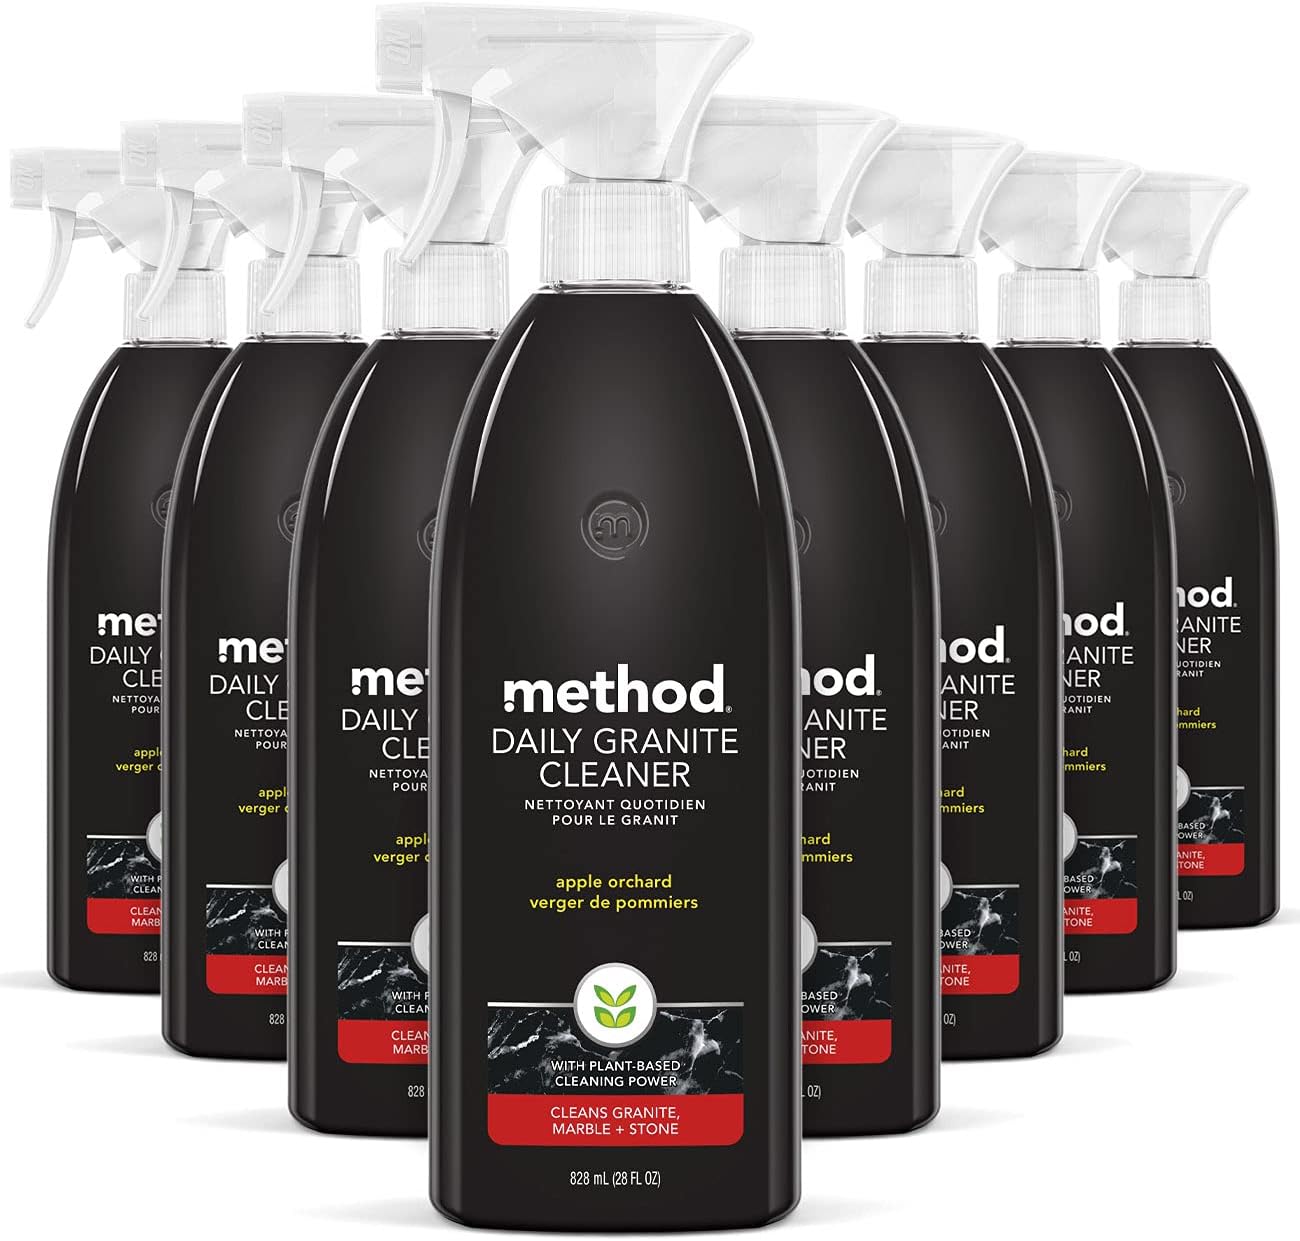 Method Daily Granite Cleaner Spray, Apple Orchard, Plant-Based Cleaning Agent for Granite, Marble, and Other Sealed Stone, 28 fl oz Spray Bottles (Pack of 8)